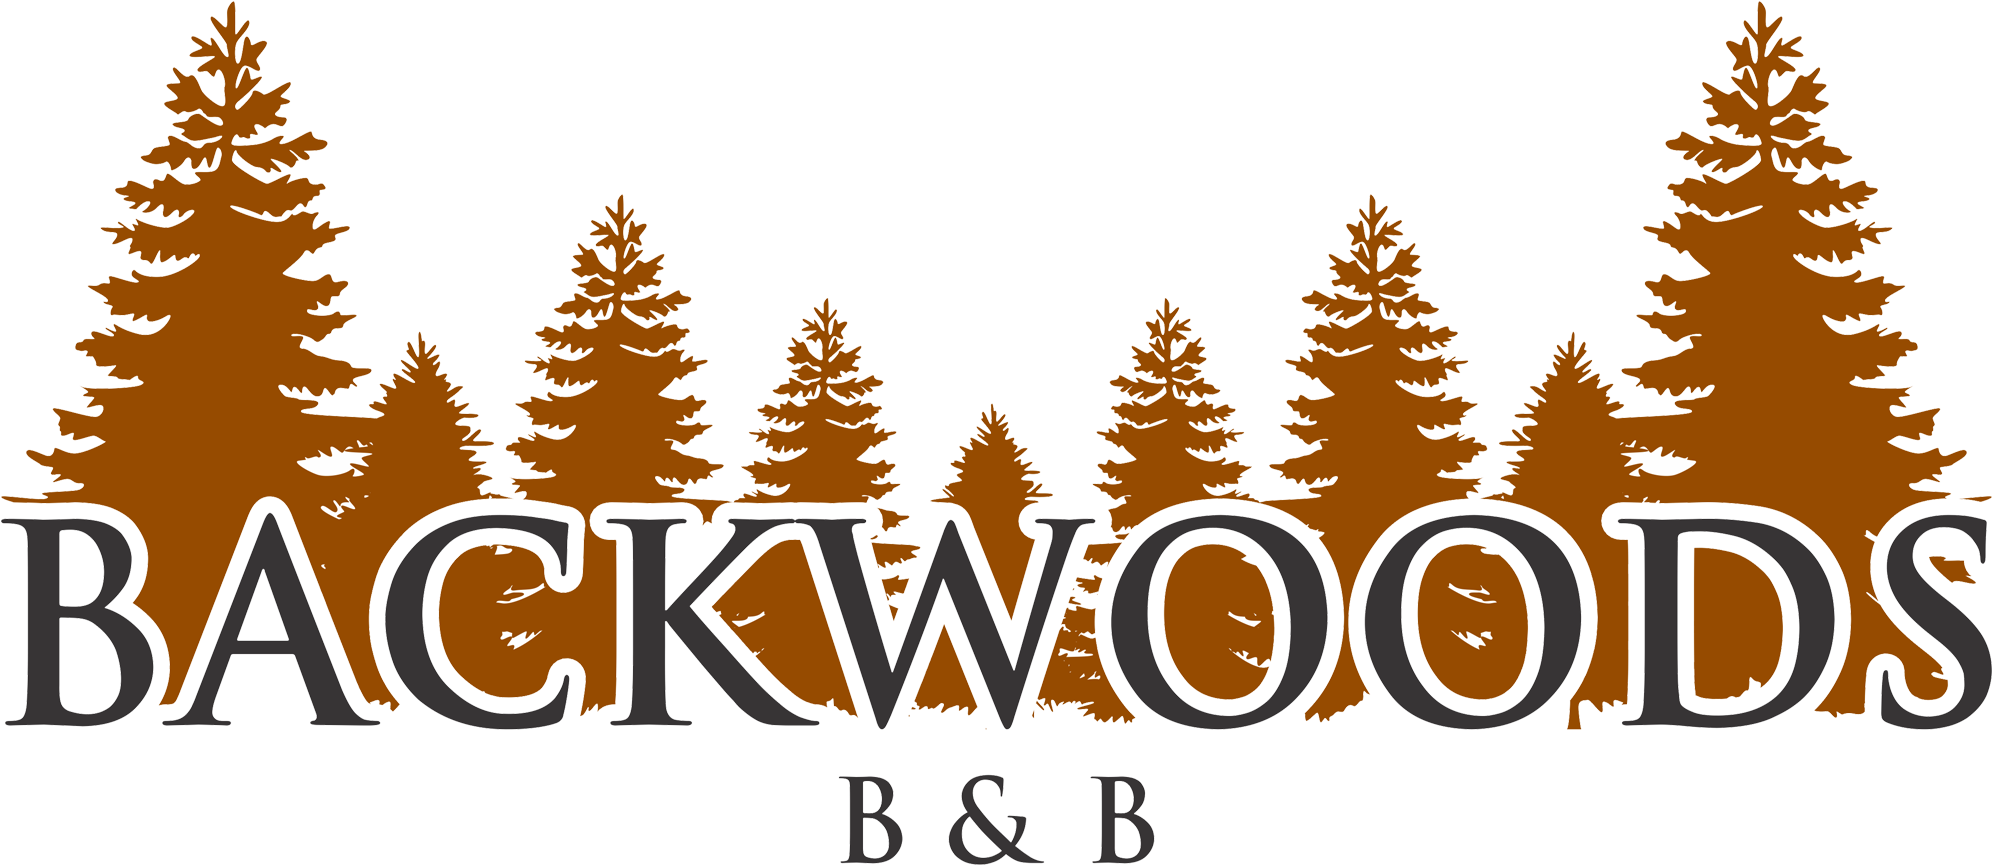 A Logo With Trees In The Background